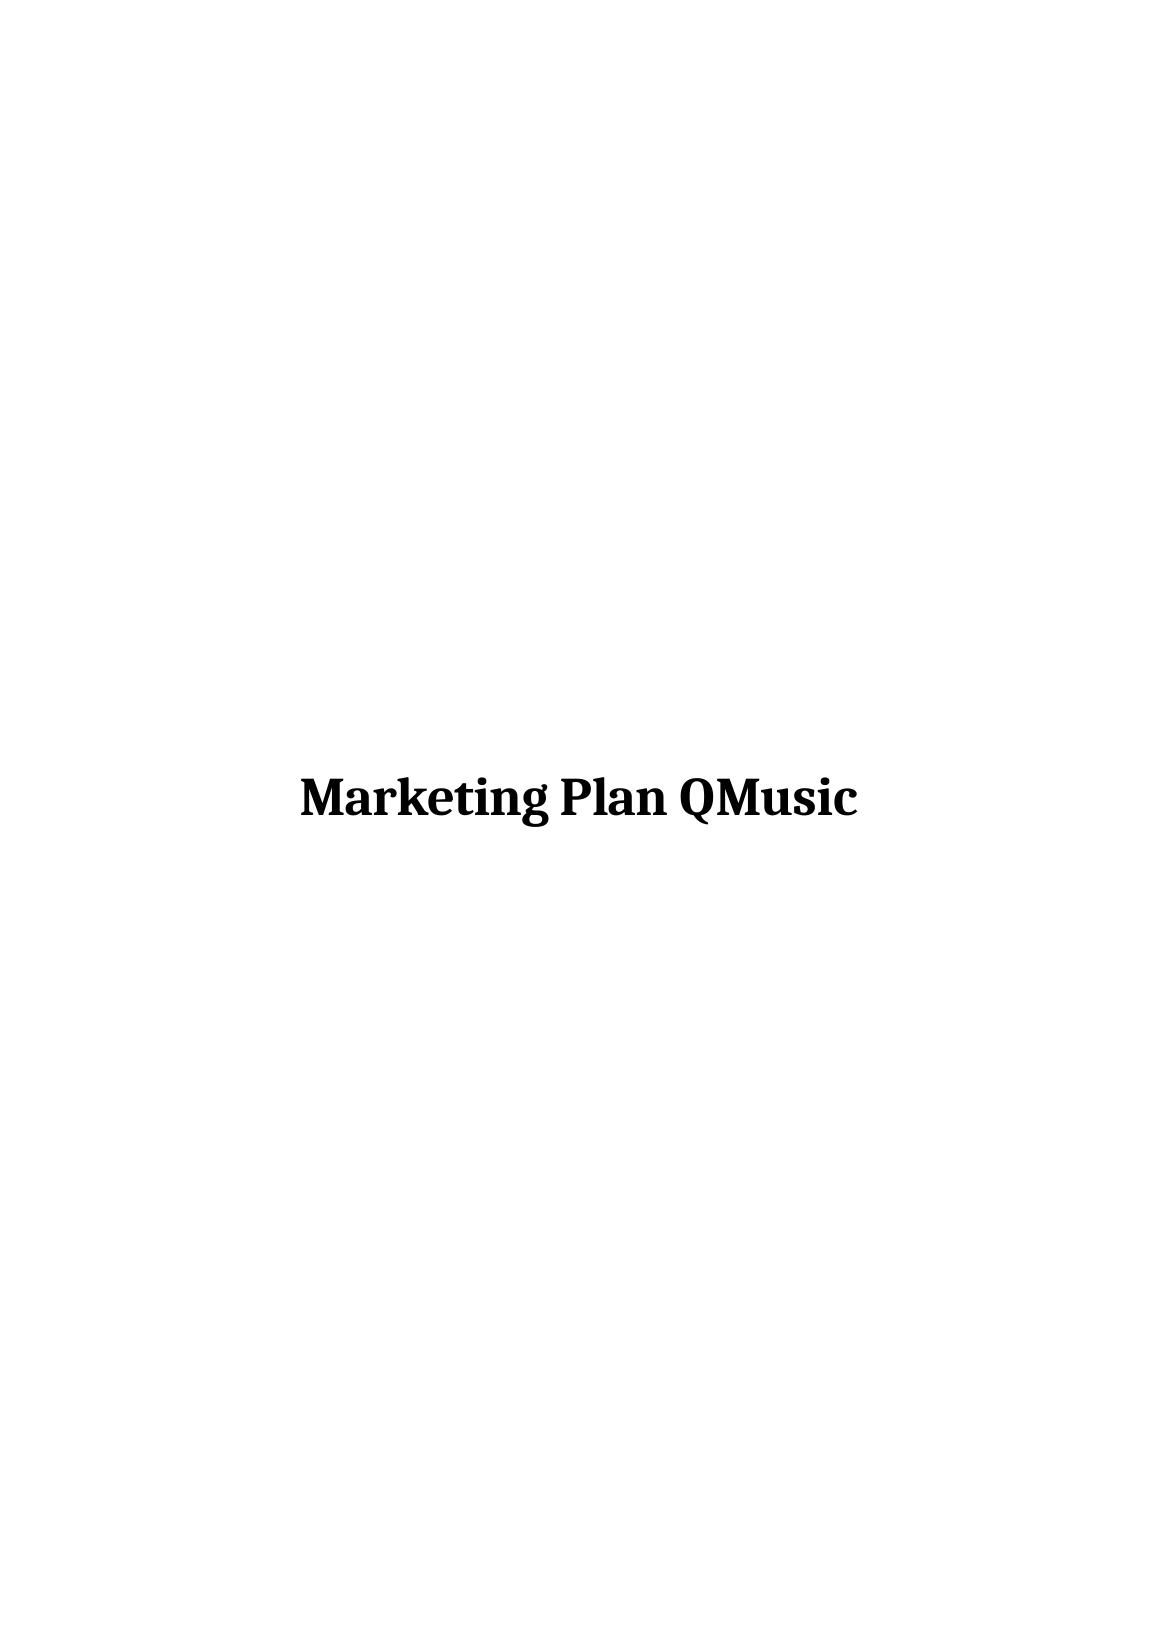 Development of the Marketing Plan for Increasing the Number of Members of QMusic_1